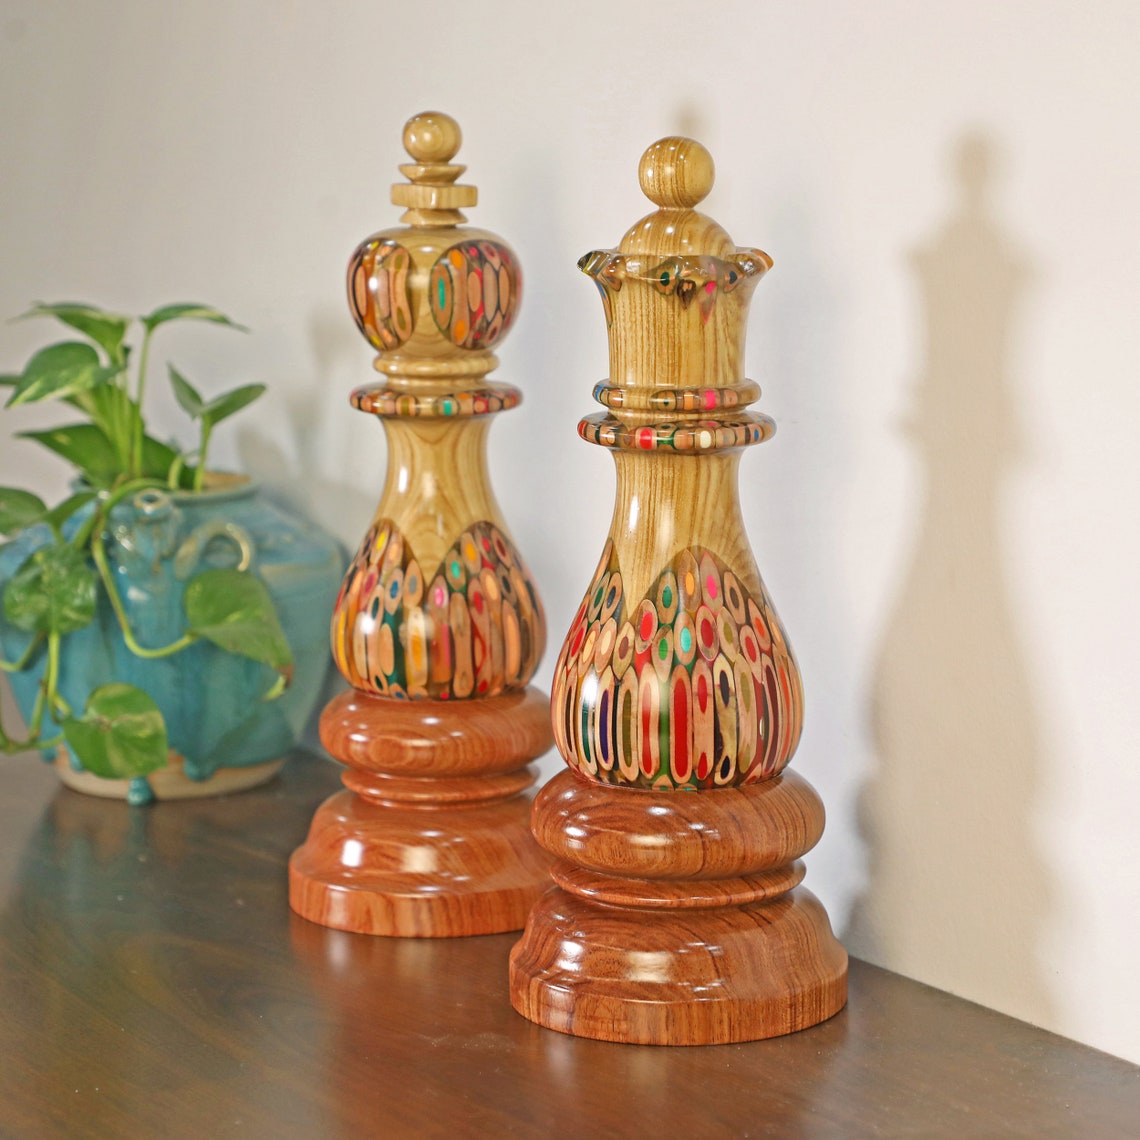 Giant Ornamental King and Queen- Chess Pieces Decor - Deluxe Serial (10)